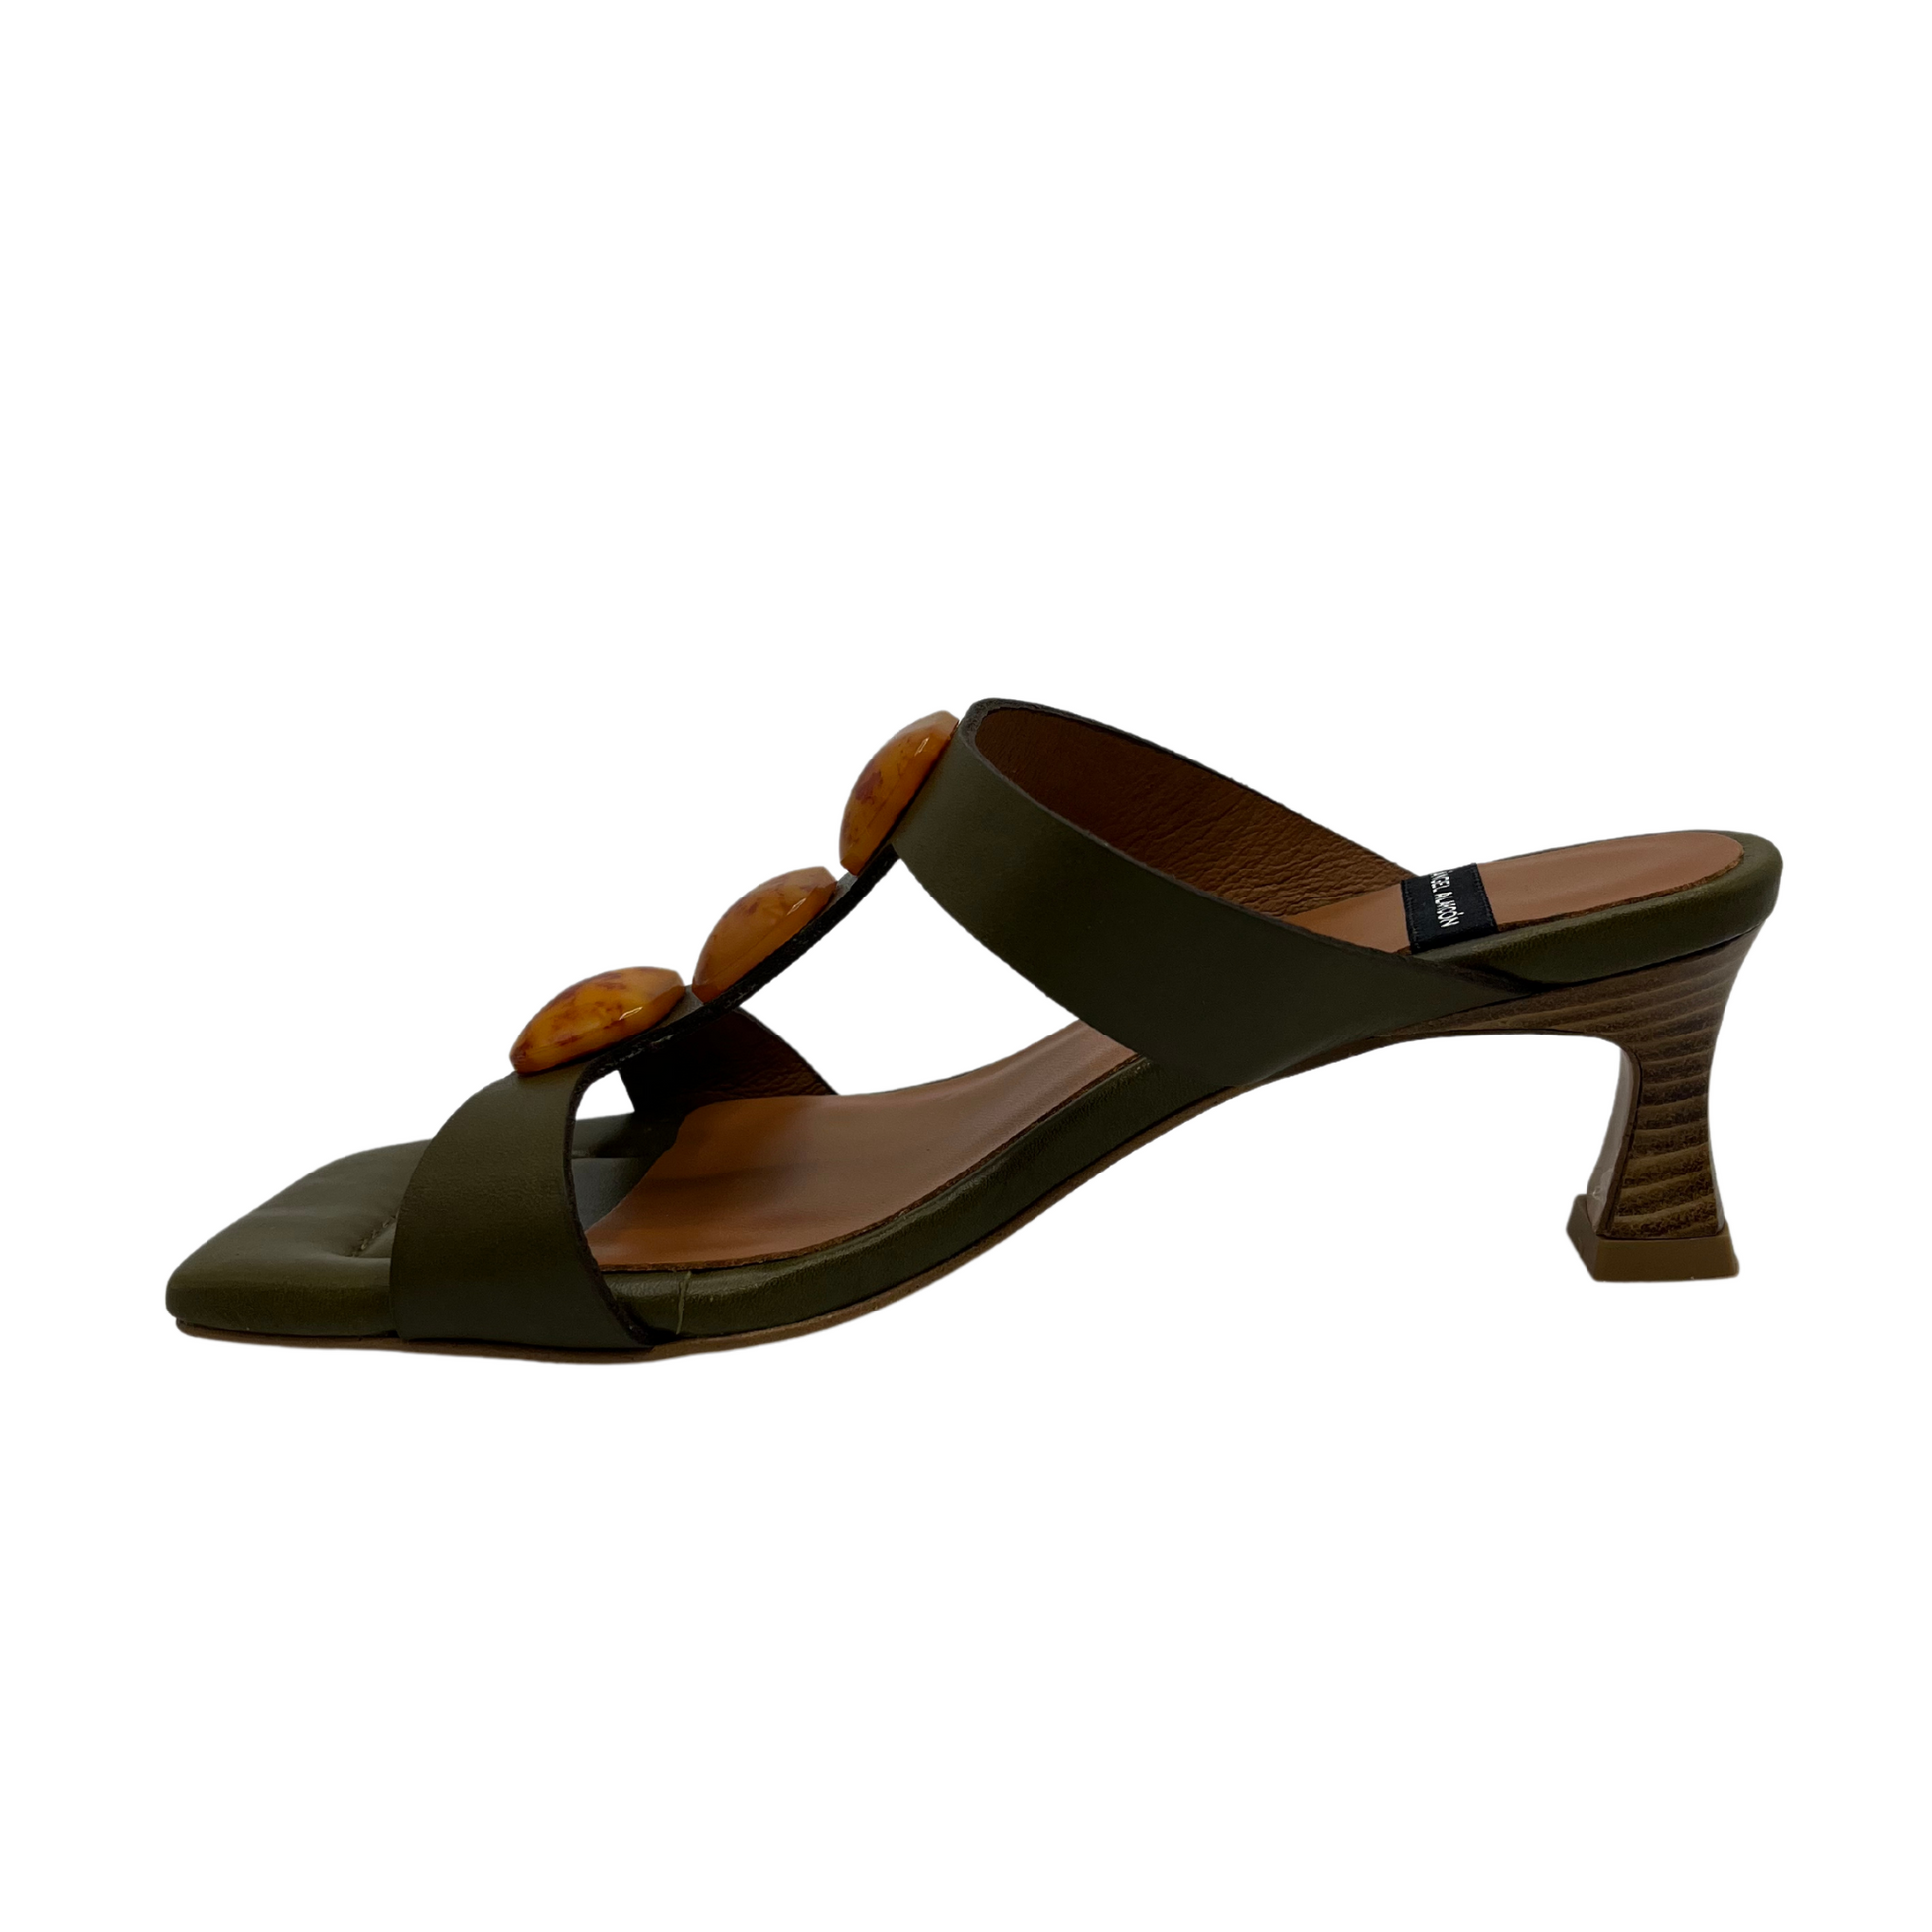 Left facing view of khaki leather sandal with square toe and square ornaments on upper. Flared heel and padded insole.